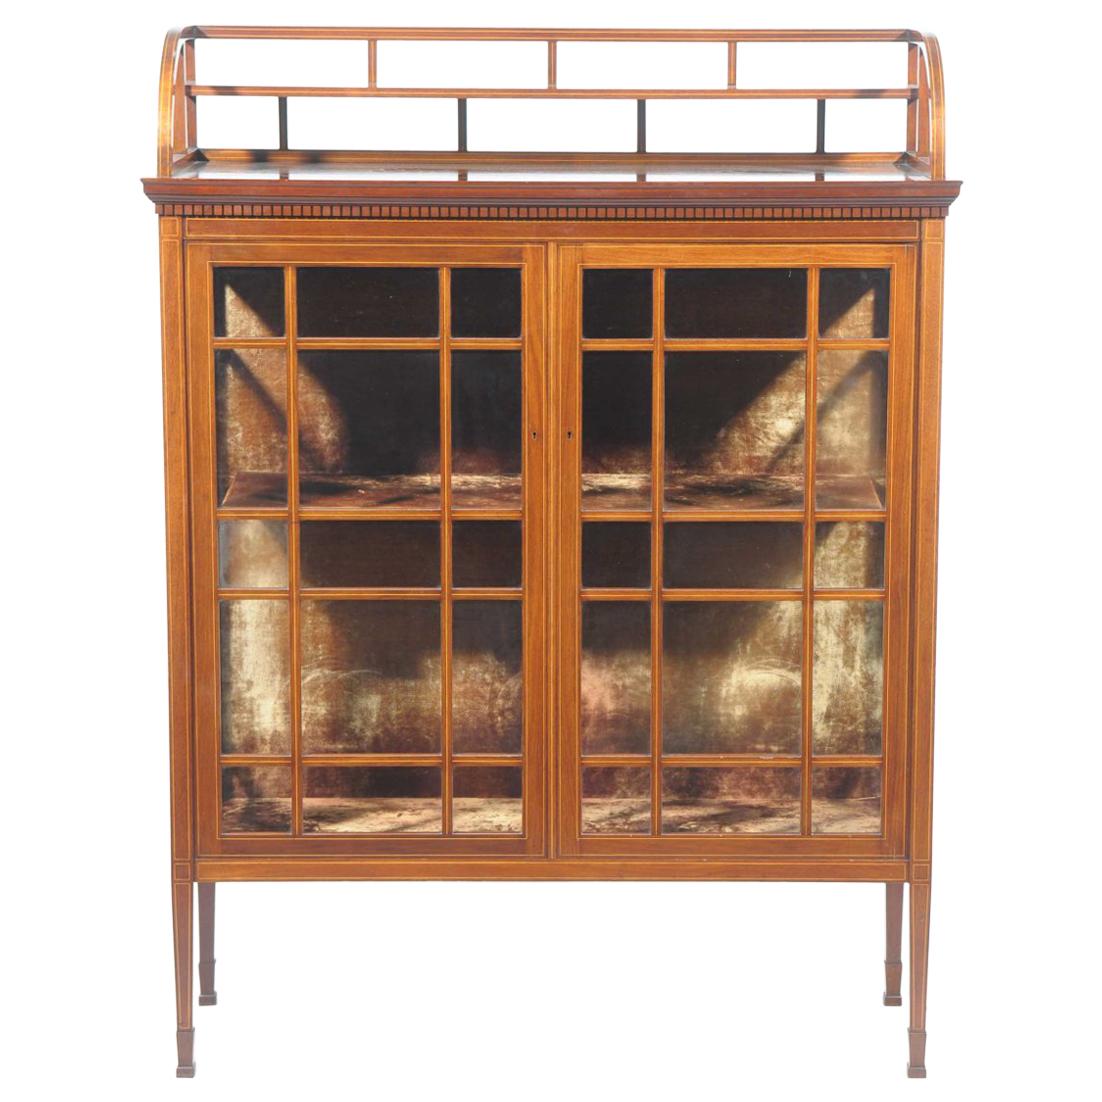 E W Godwin, Collinson & Lock, an Anglo Japanese Mahogany and Satinwood Cabinet